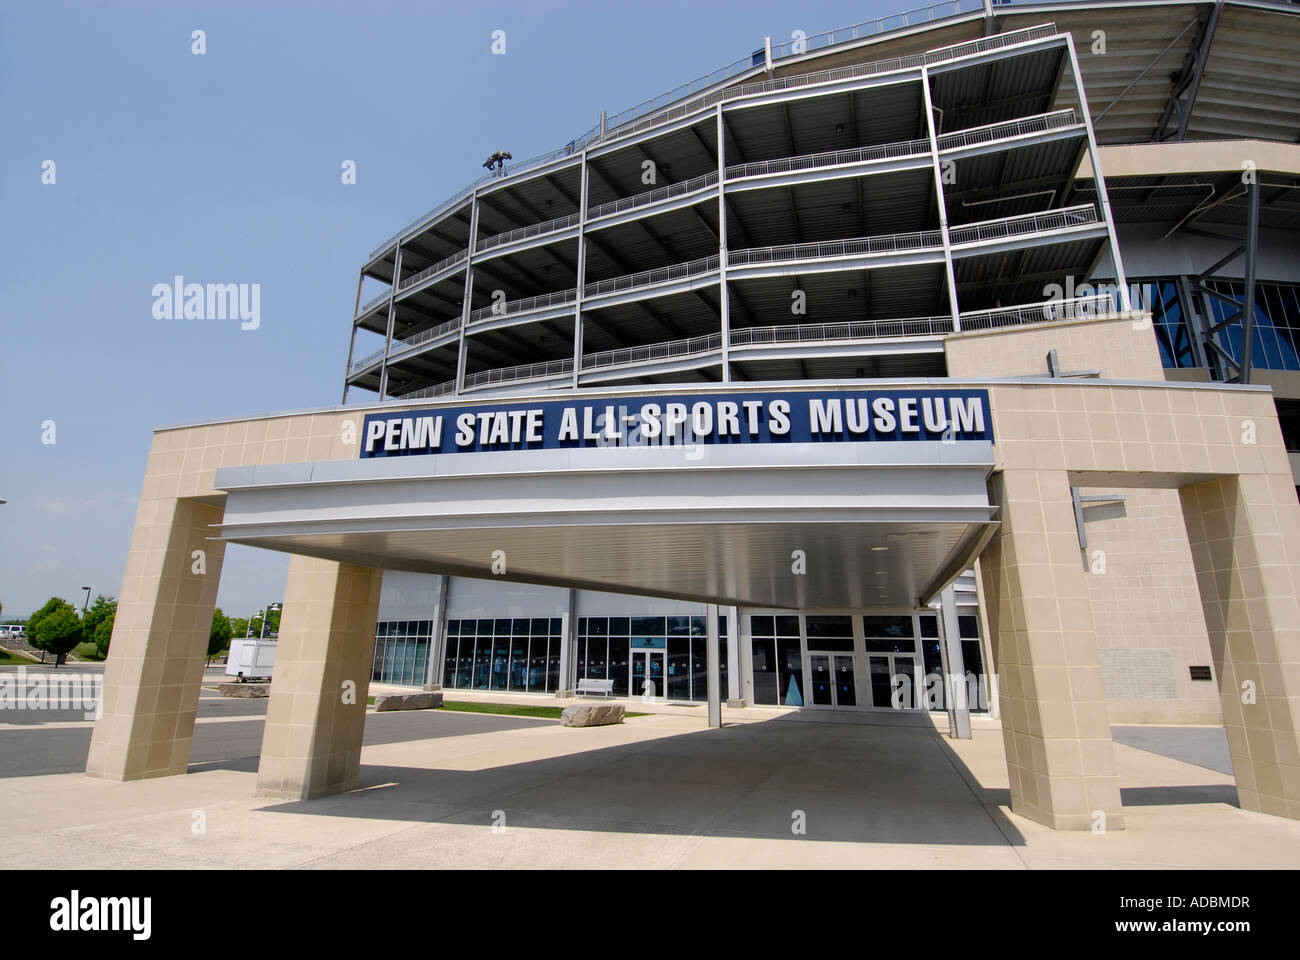 James A Beaver Fußball-Stadion am Penn Pennsylvania State University in State College oder University Park, Pennsylvania Stockfoto